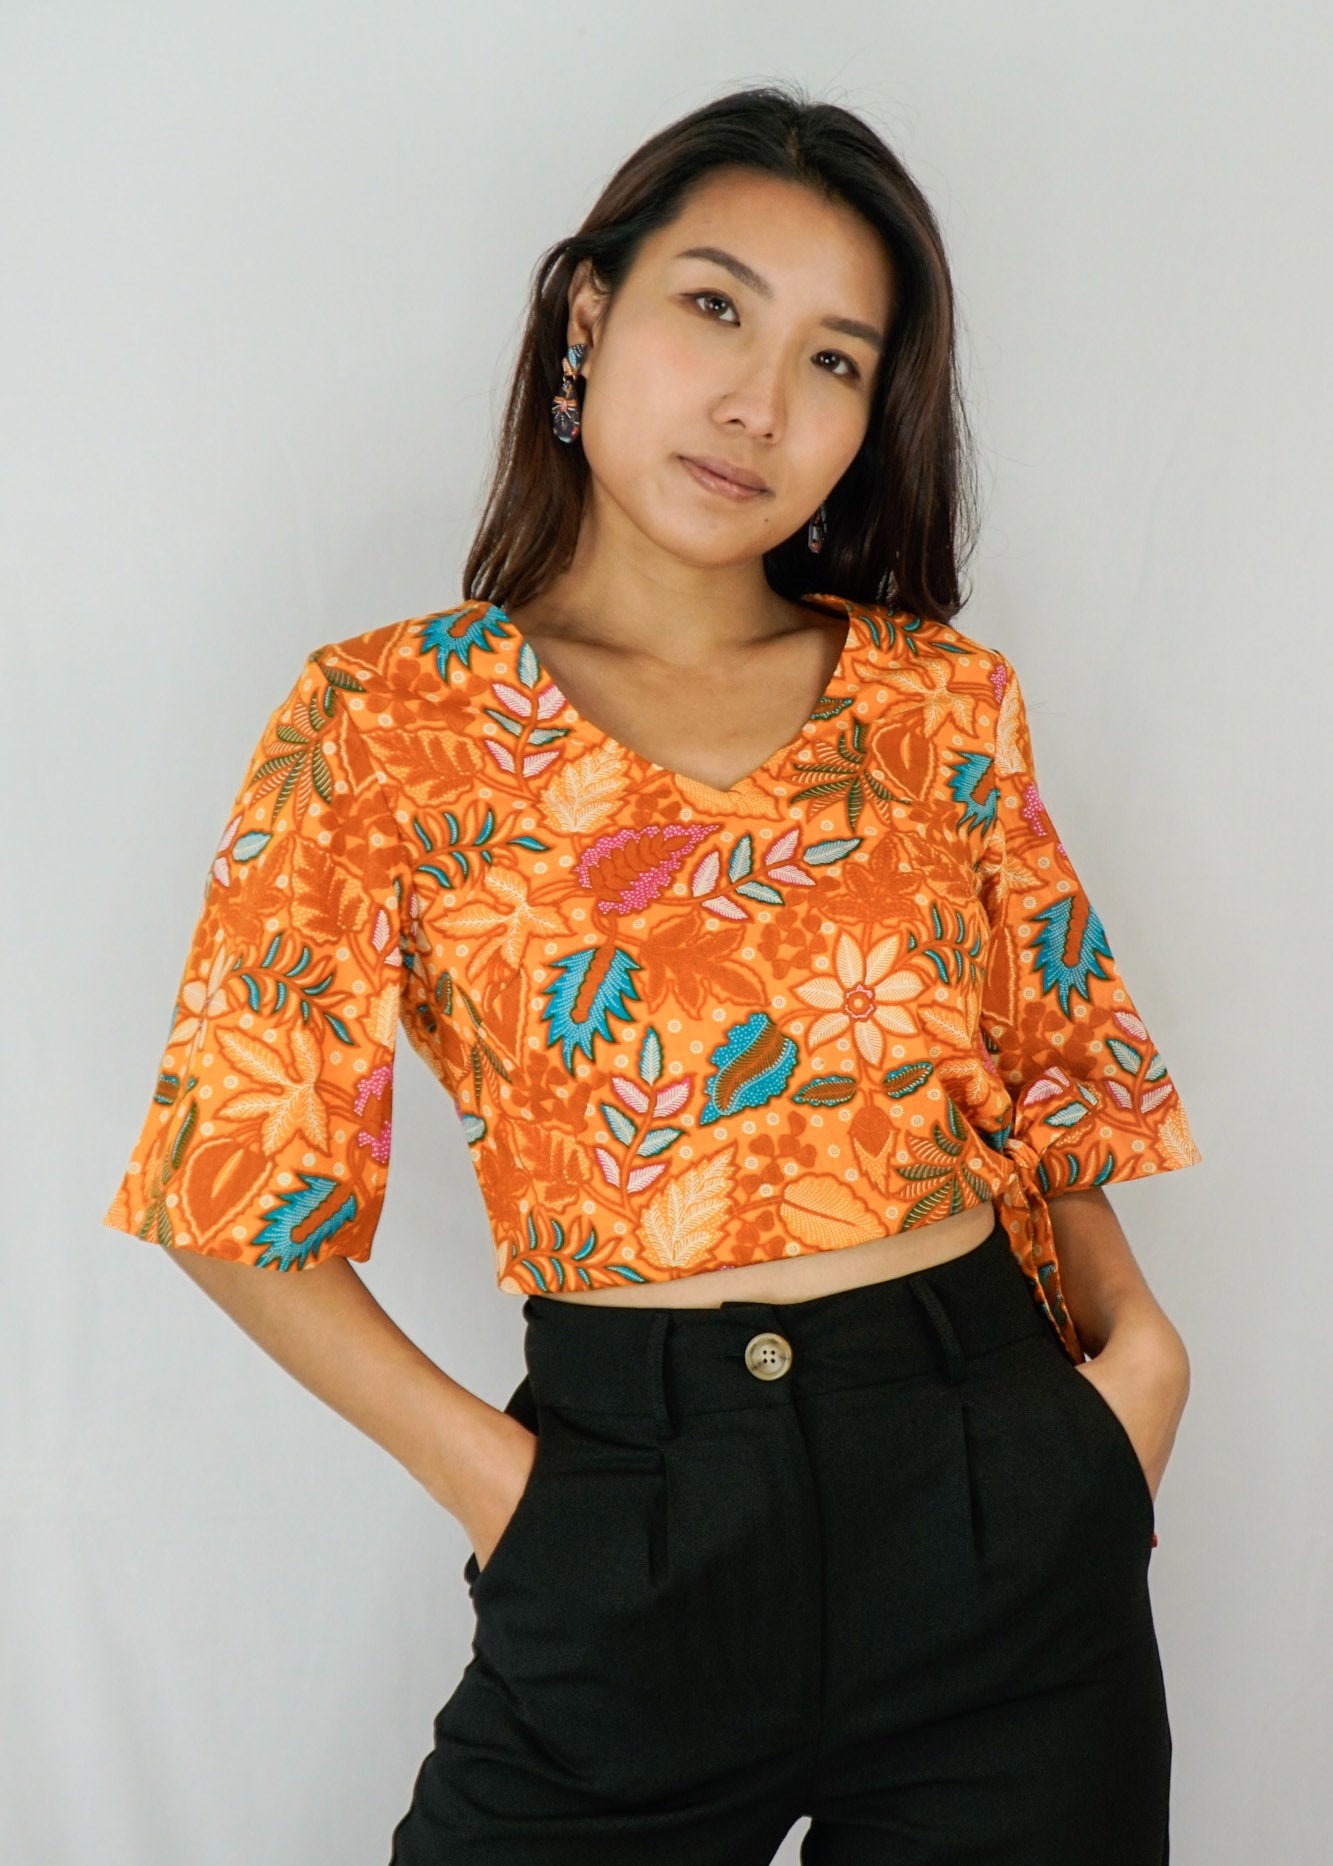 Tracy Flare Sleeves Top in Ferny Fantasy